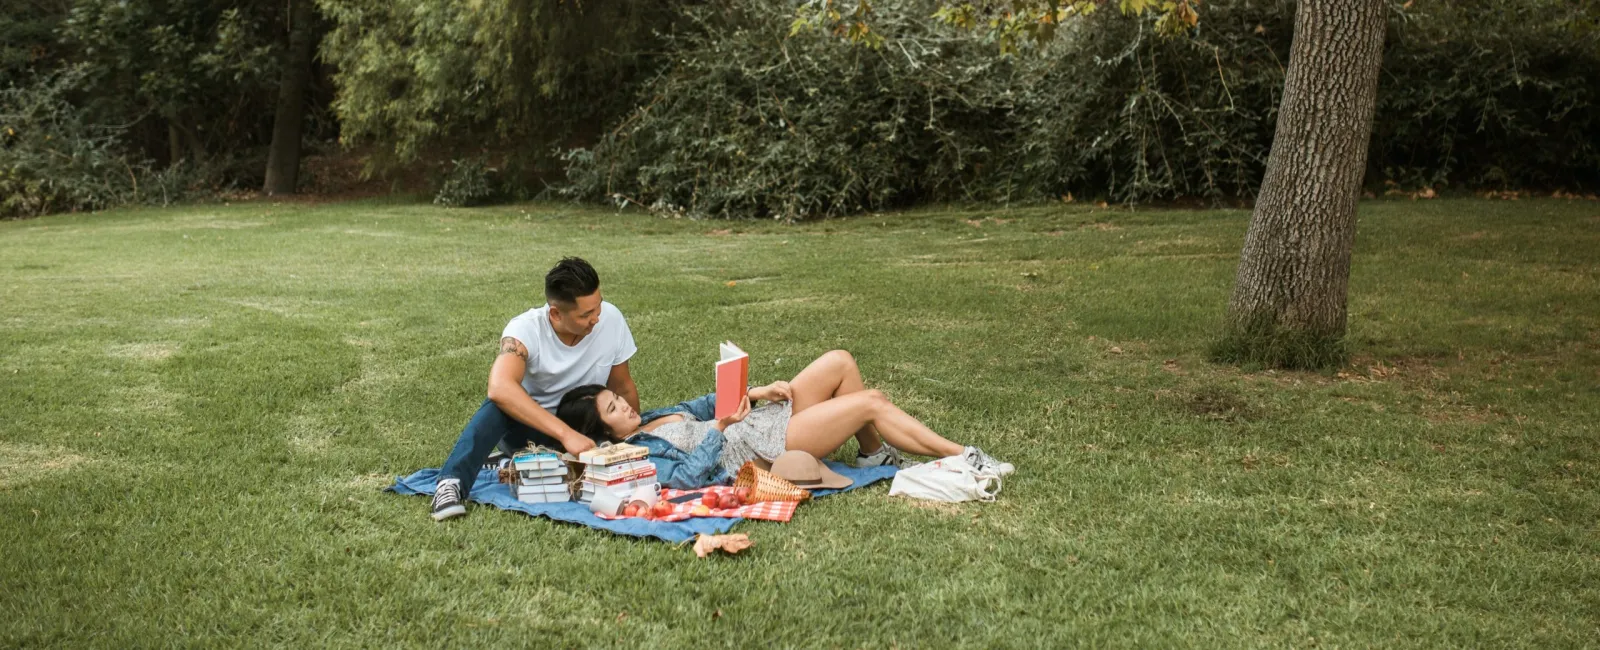 a man and woman sitting on a blanket in a grassy area